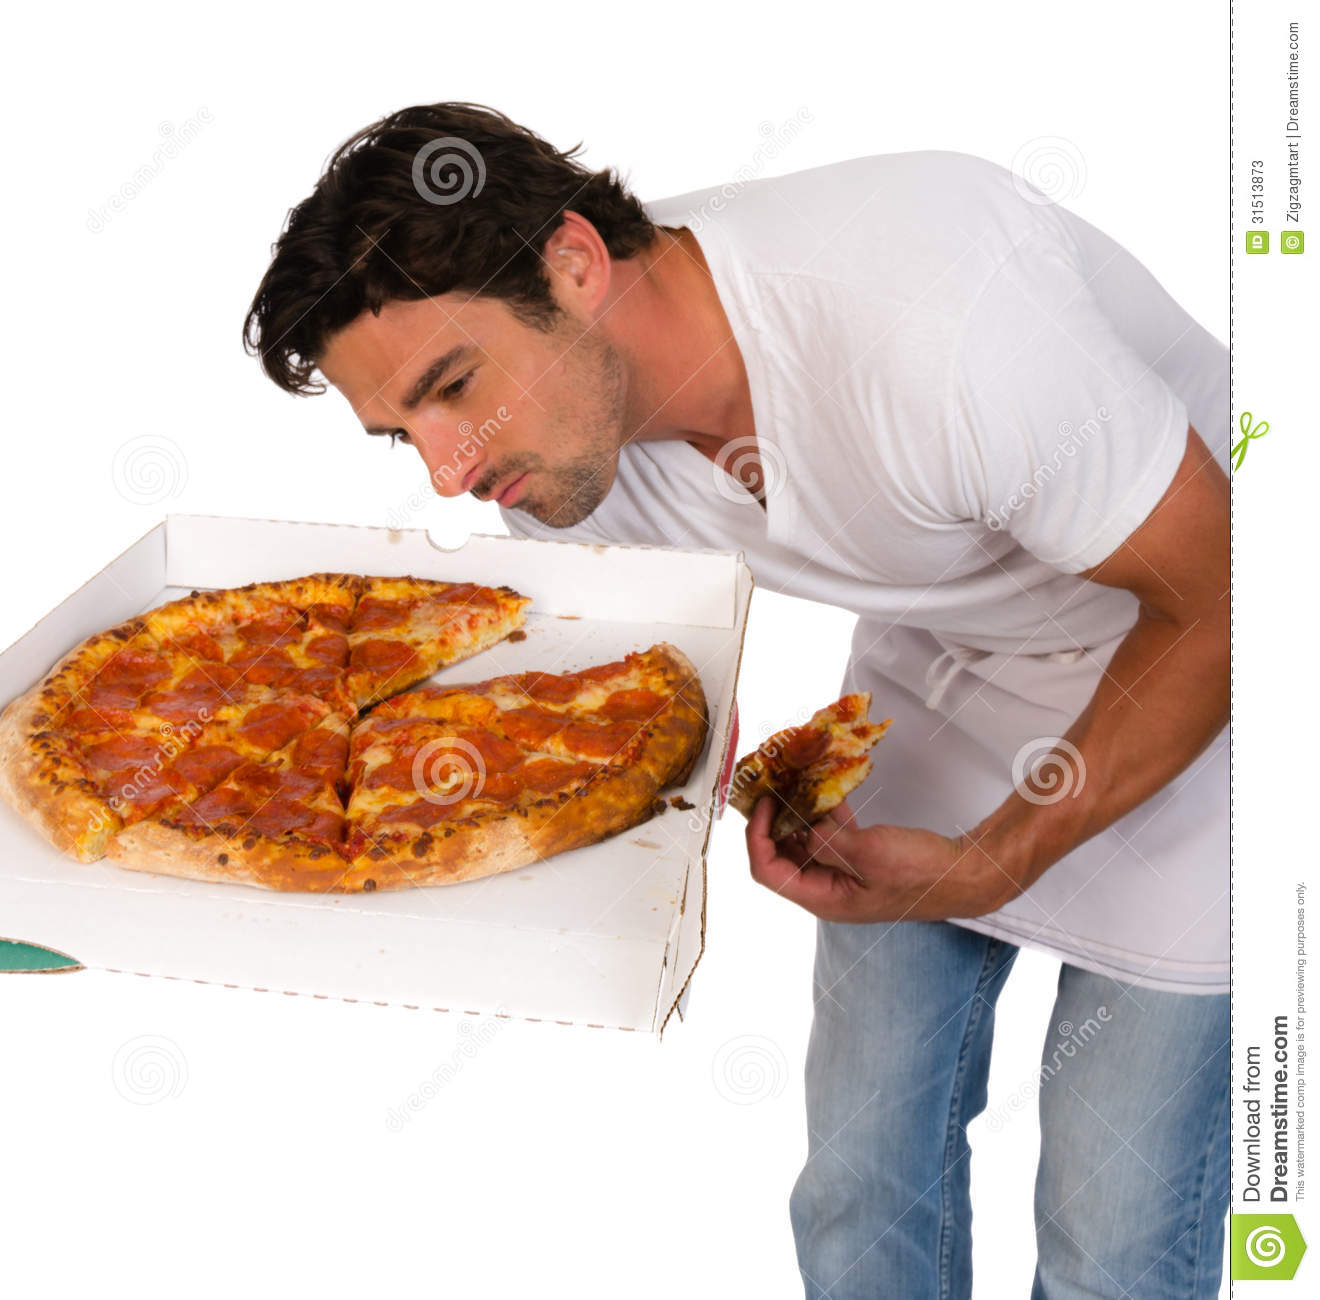 Pizza Delivery Man With A Pizza Stock Photos   Image  31513873